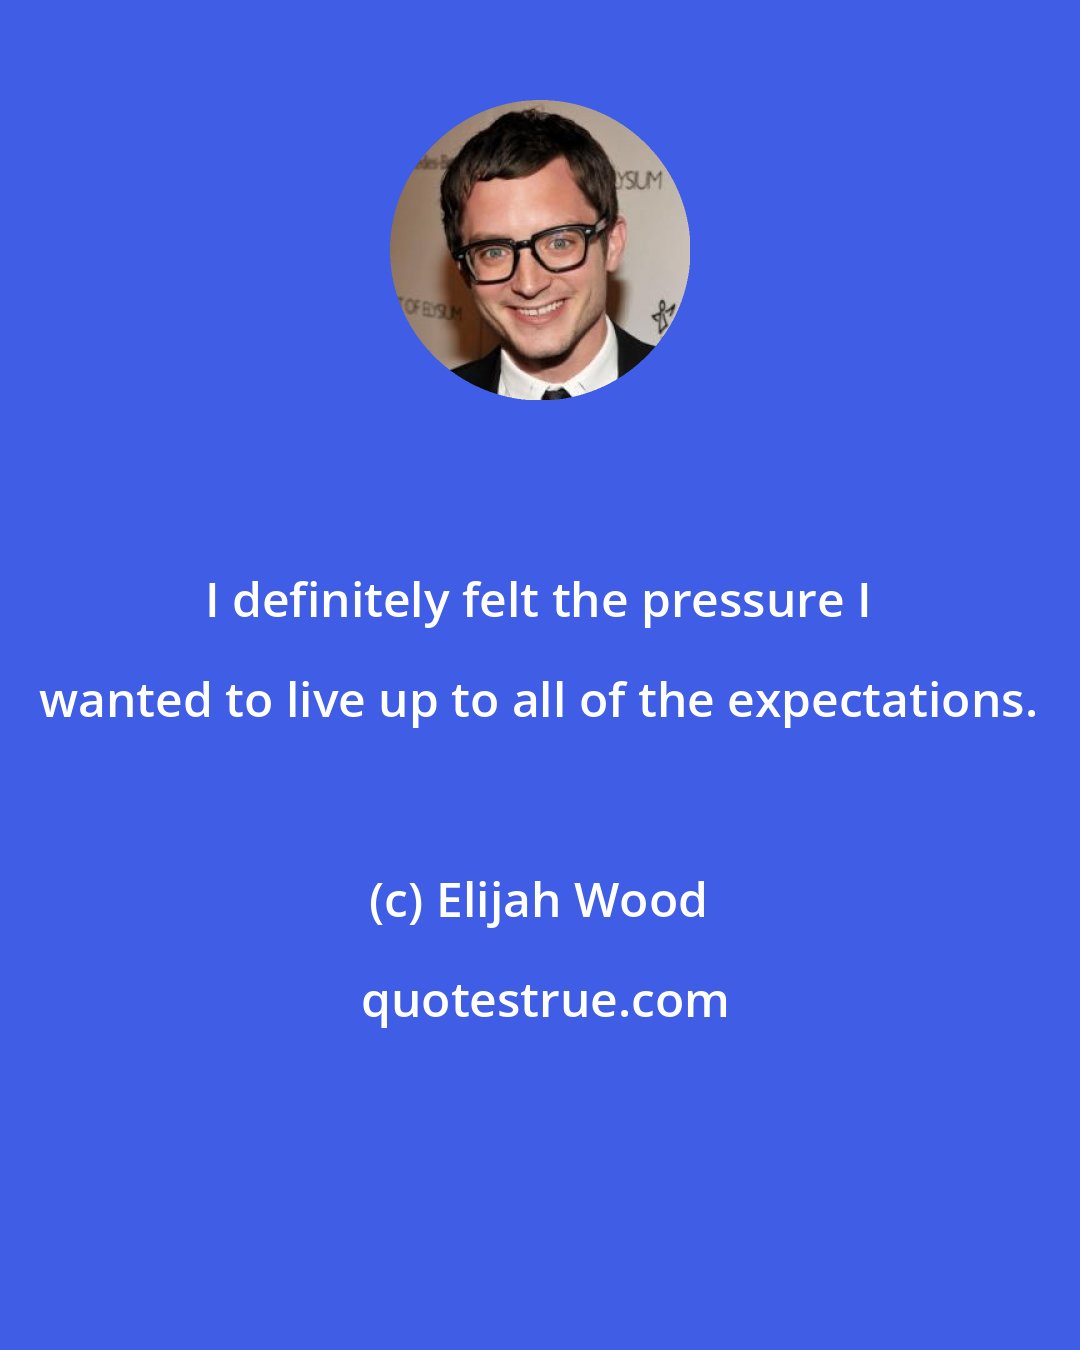 Elijah Wood: I definitely felt the pressure I wanted to live up to all of the expectations.